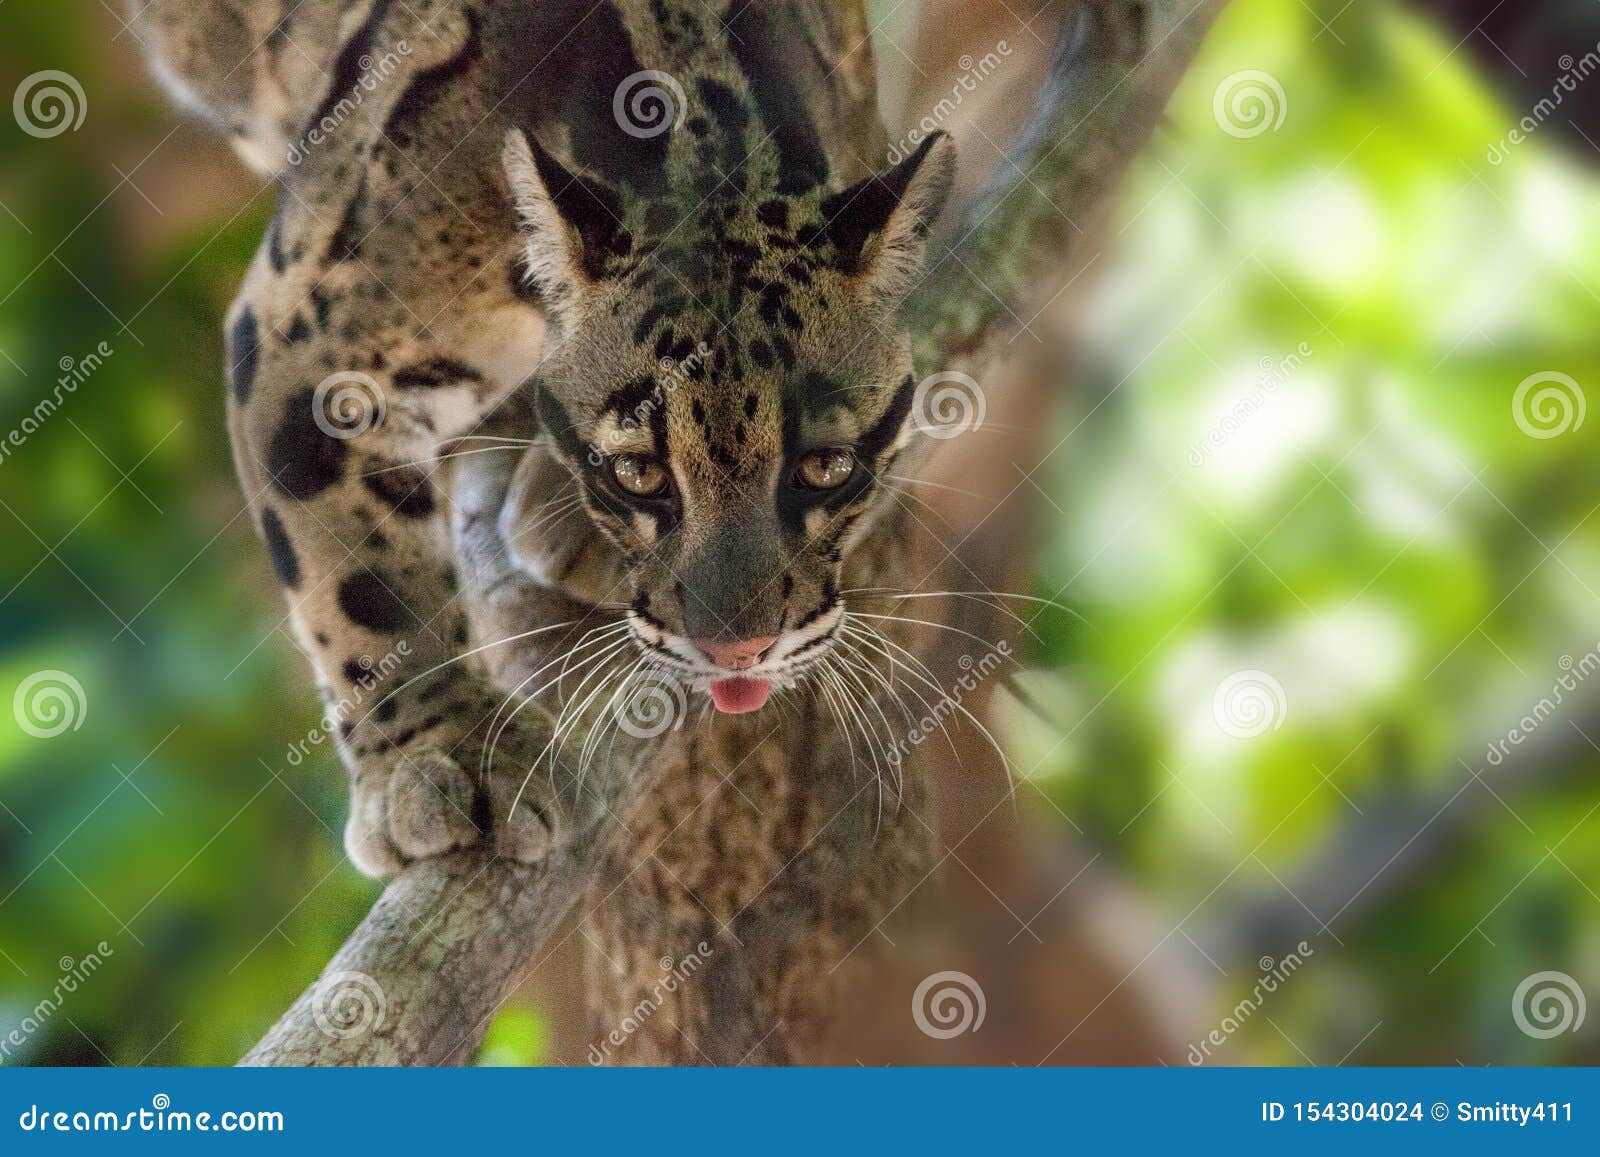 male adult clouded leopard neofelis nebulosa is listed as vulnerable